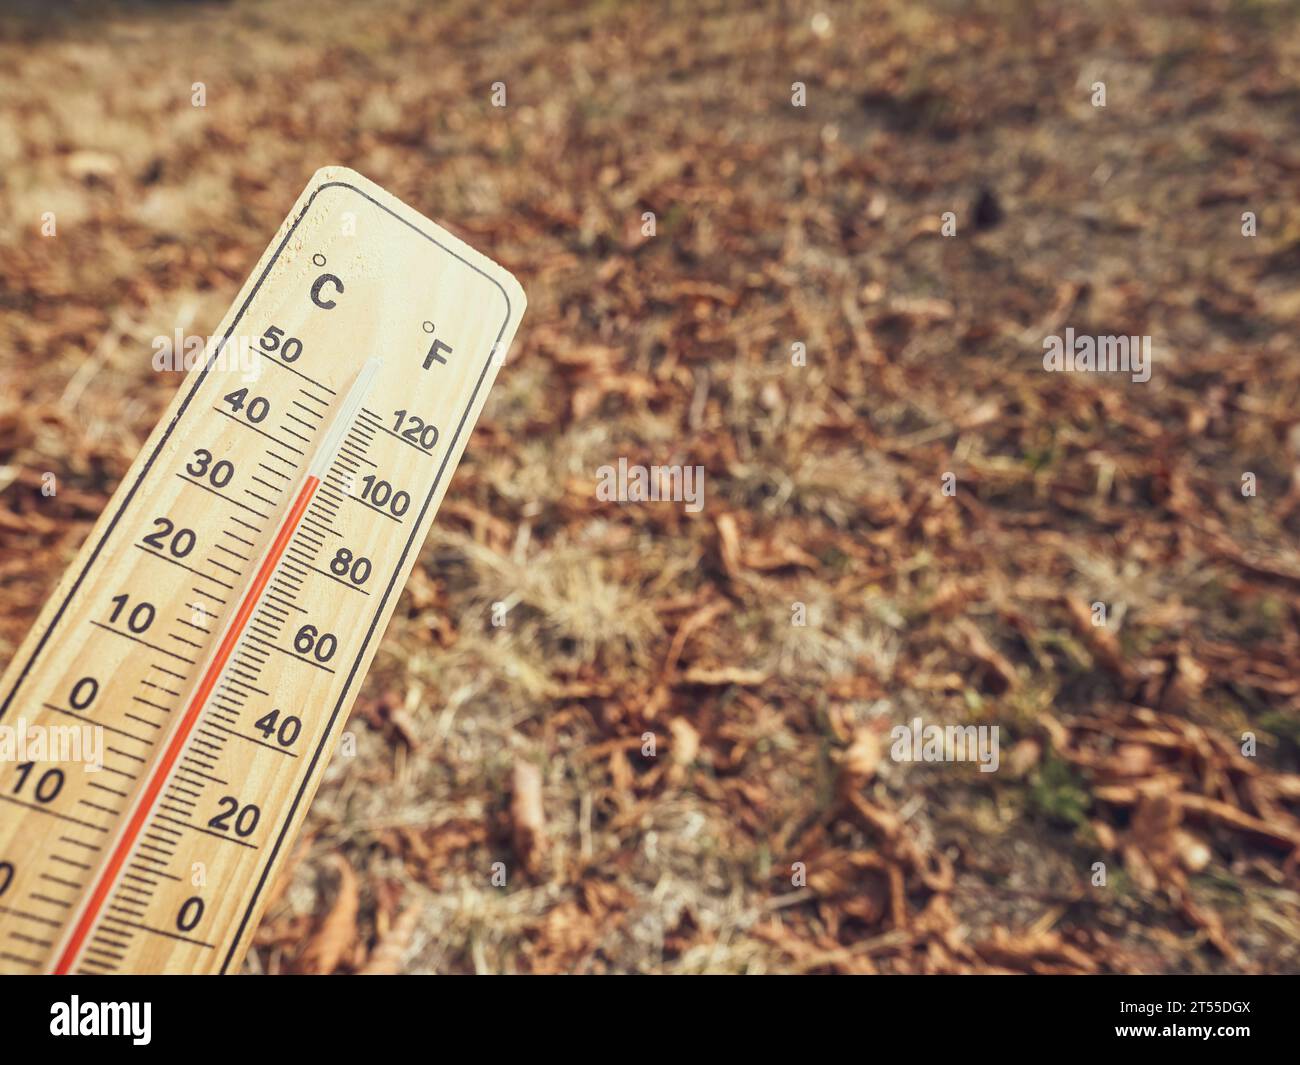 https://c8.alamy.com/comp/2T55DGX/wooden-thermometer-with-red-measuring-liquid-showing-high-temperatures-over-36-degrees-celsius-on-sunny-day-on-background-of-dry-lawn-concept-of-heat-2T55DGX.jpg